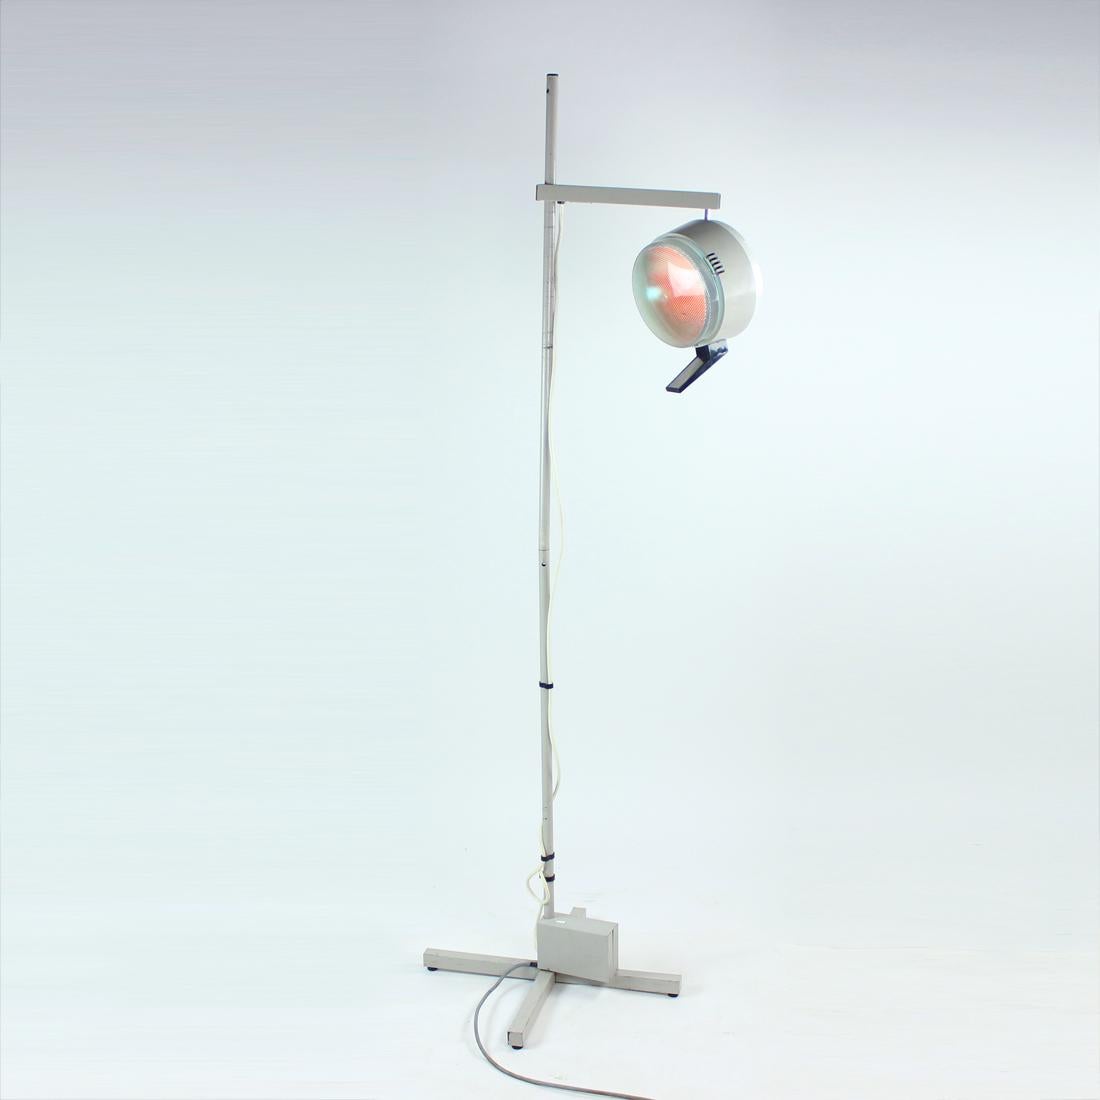 Wow, what a find! This is an original floor lamp used by a medical doctor since 1960s. The lamp stands on a metal base with gray colored steel. The actual light is held by a metal arm. The light is easy to adjust to any postion. There are two